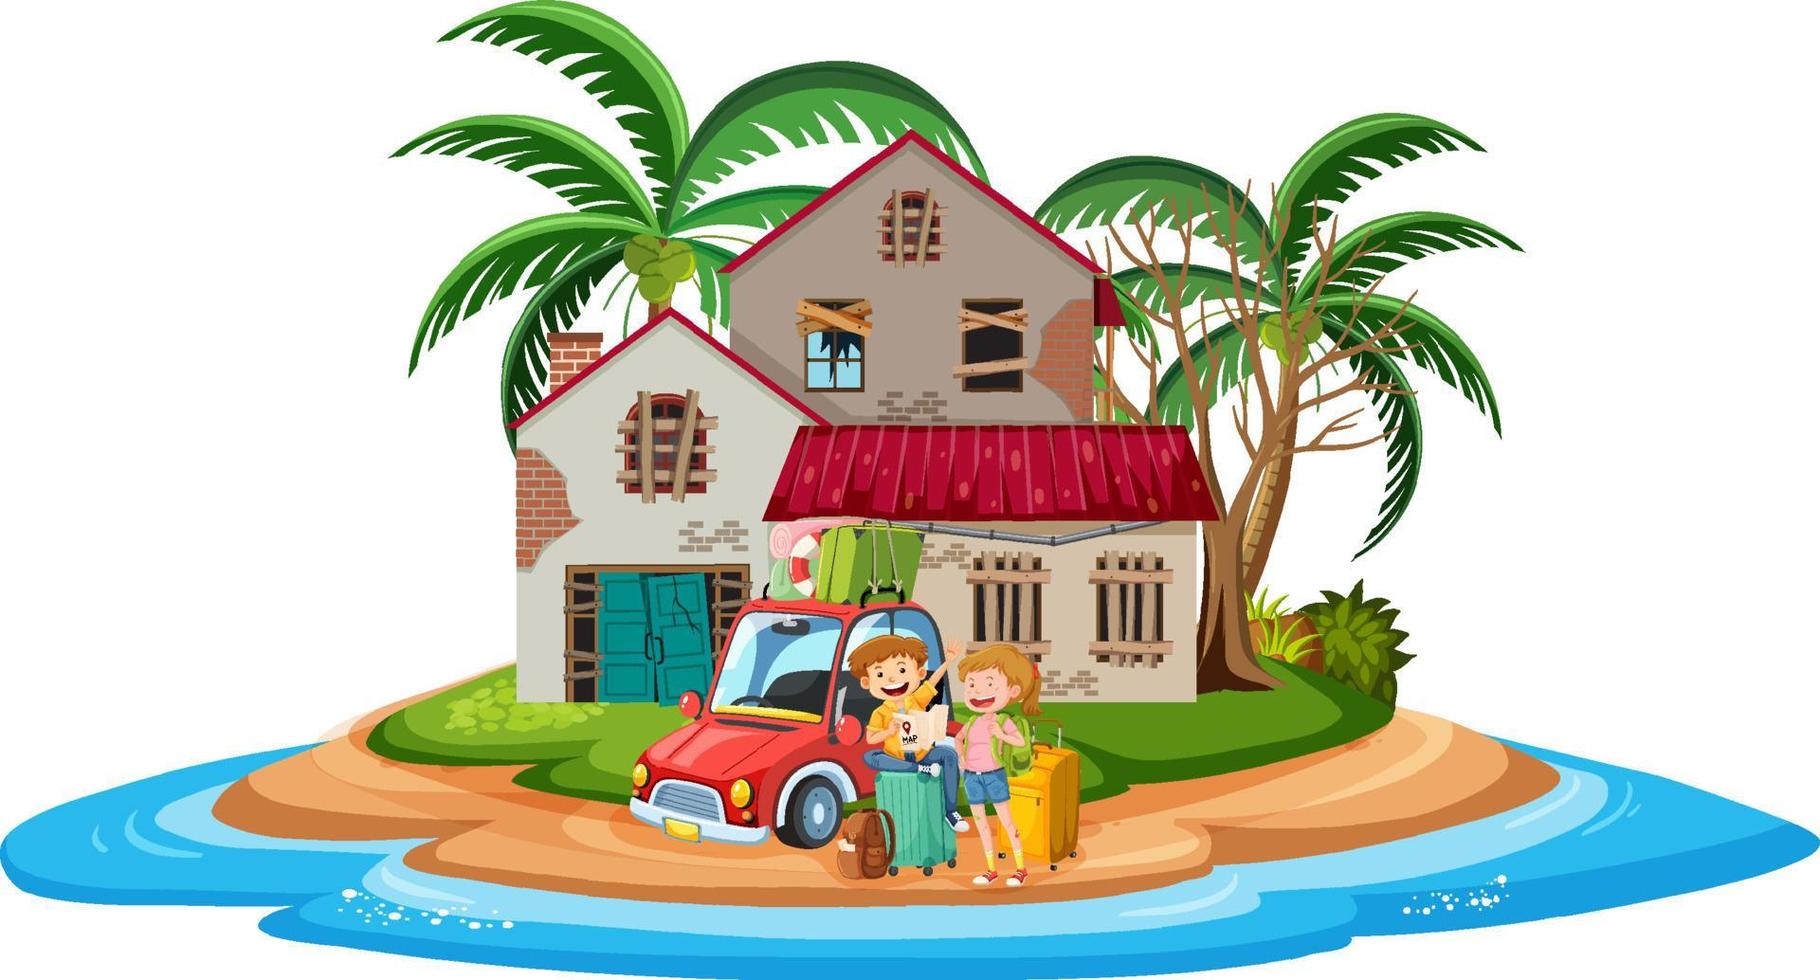 Couple in front of an abandon beach house on the island vector